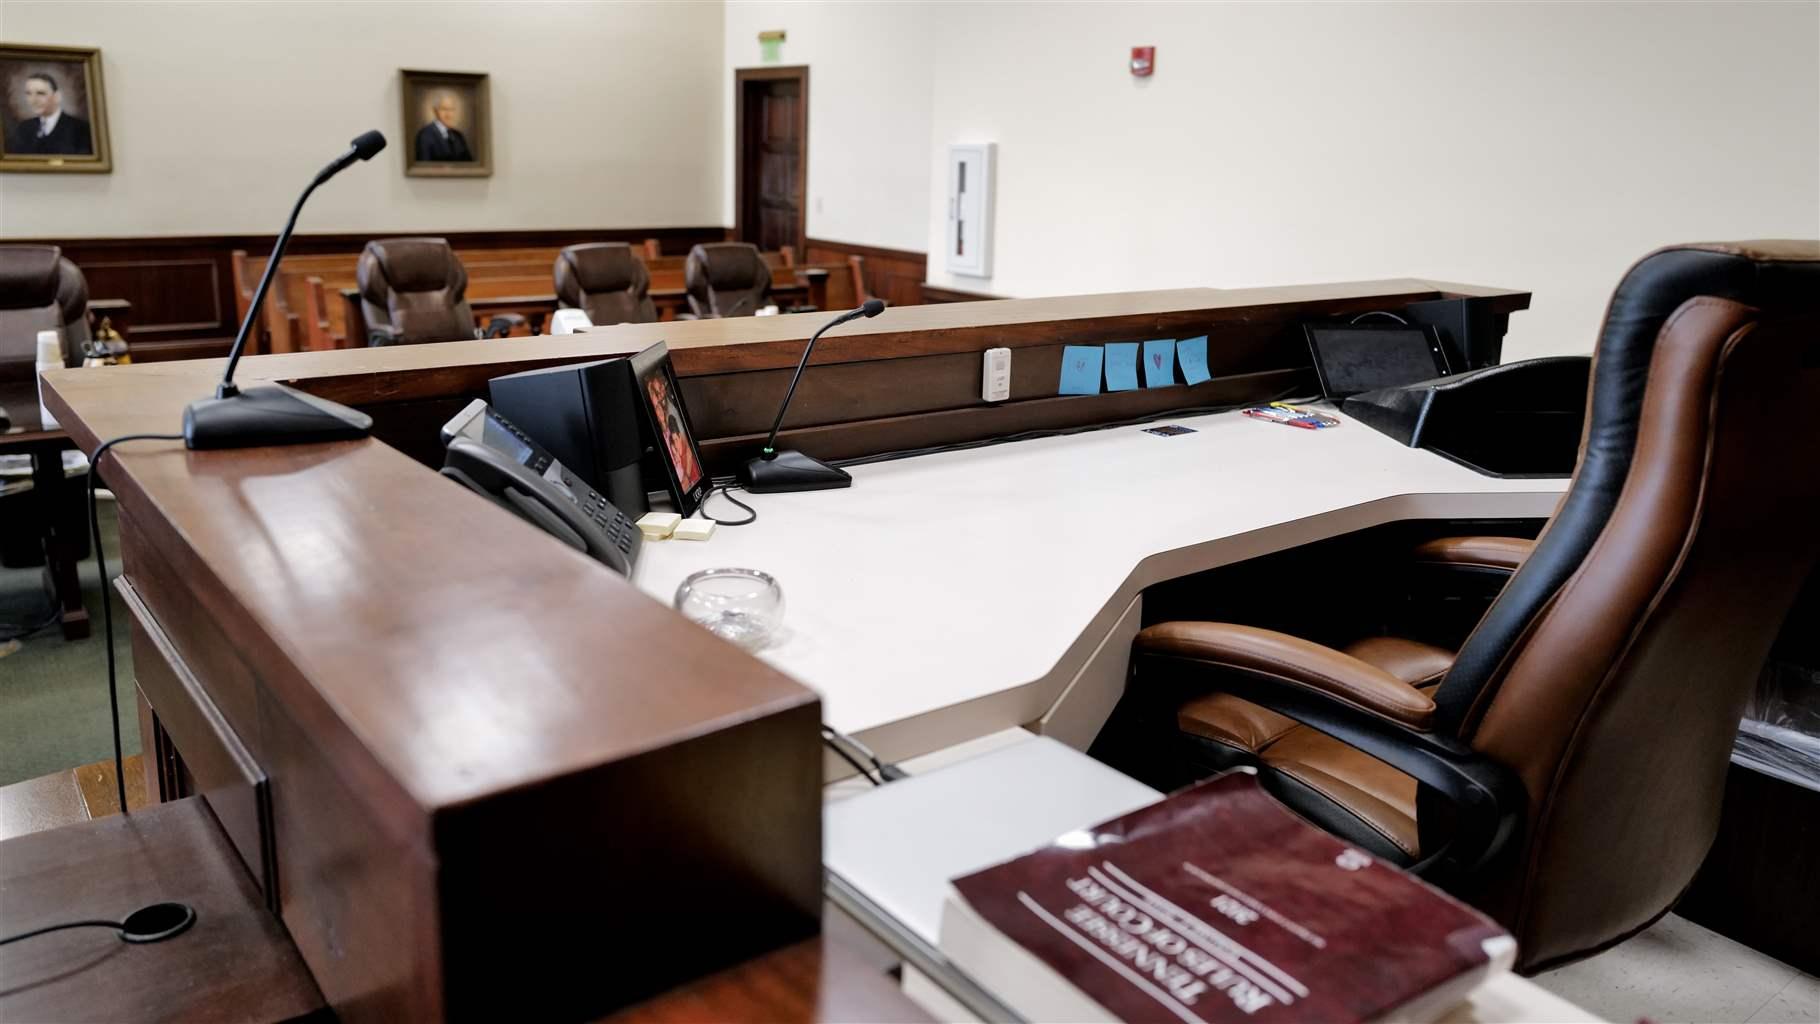 A dark wooden desk overlooks an empty courtroom decorated with several painted portraits.